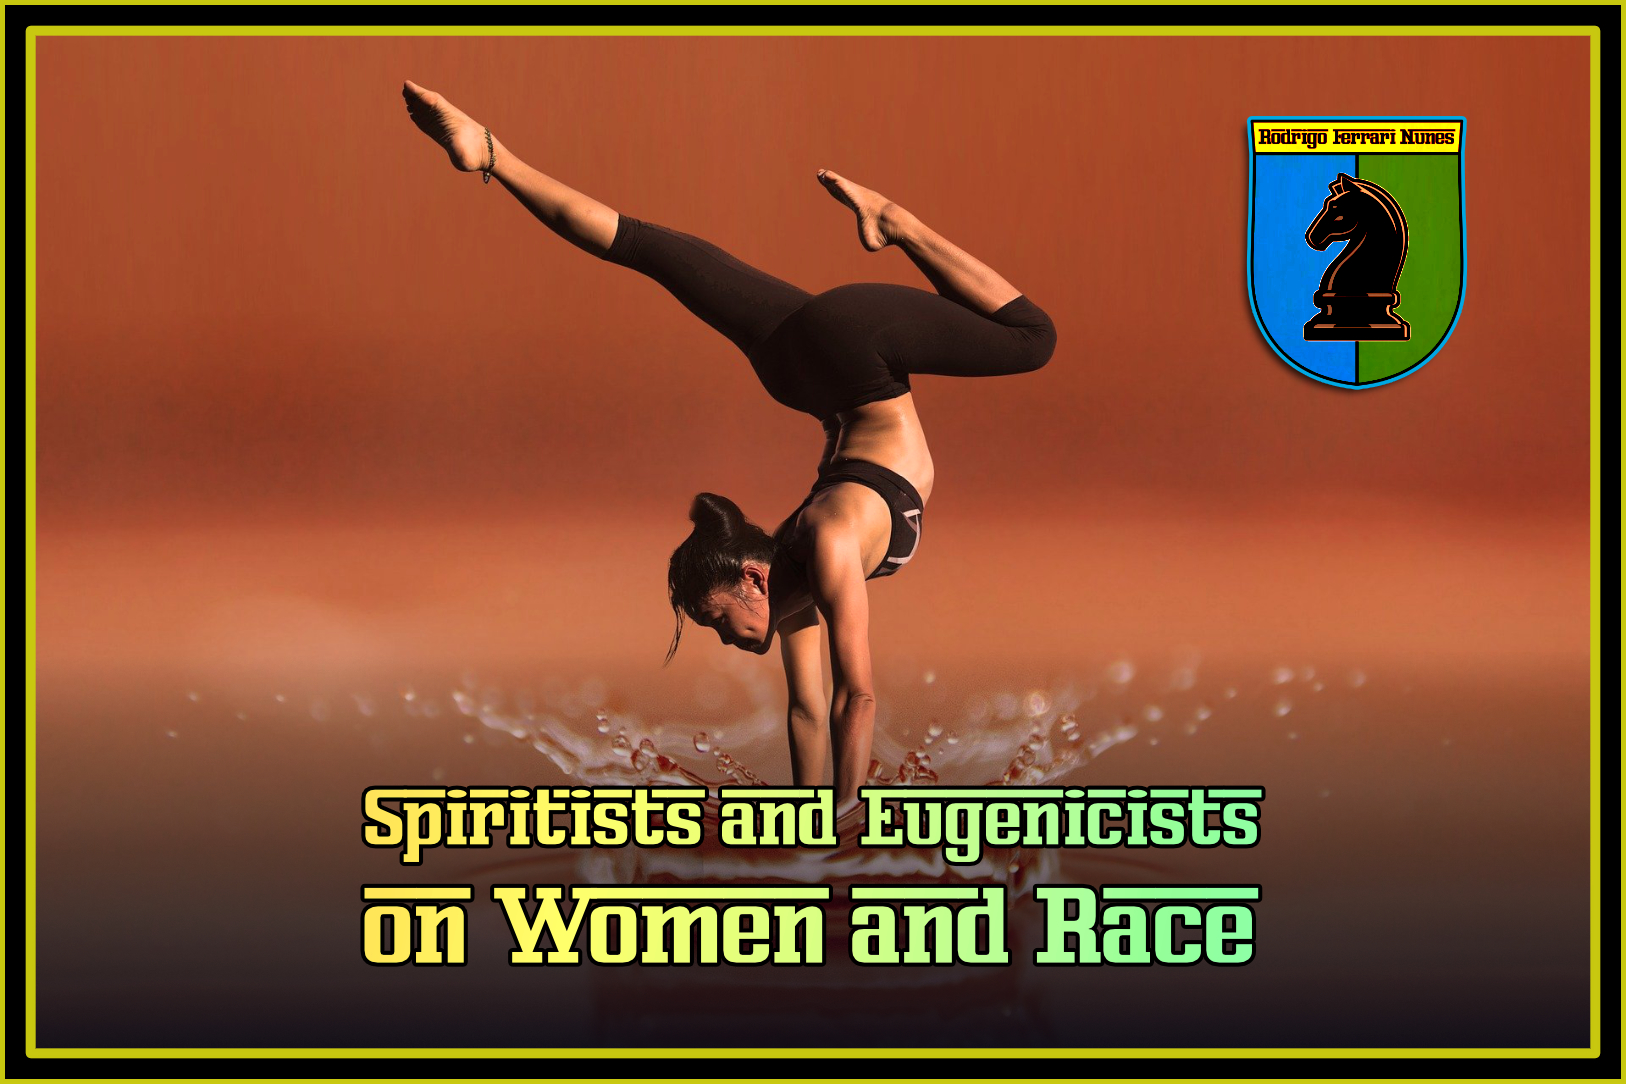 Spiritists and Eugenicists on Women and Race